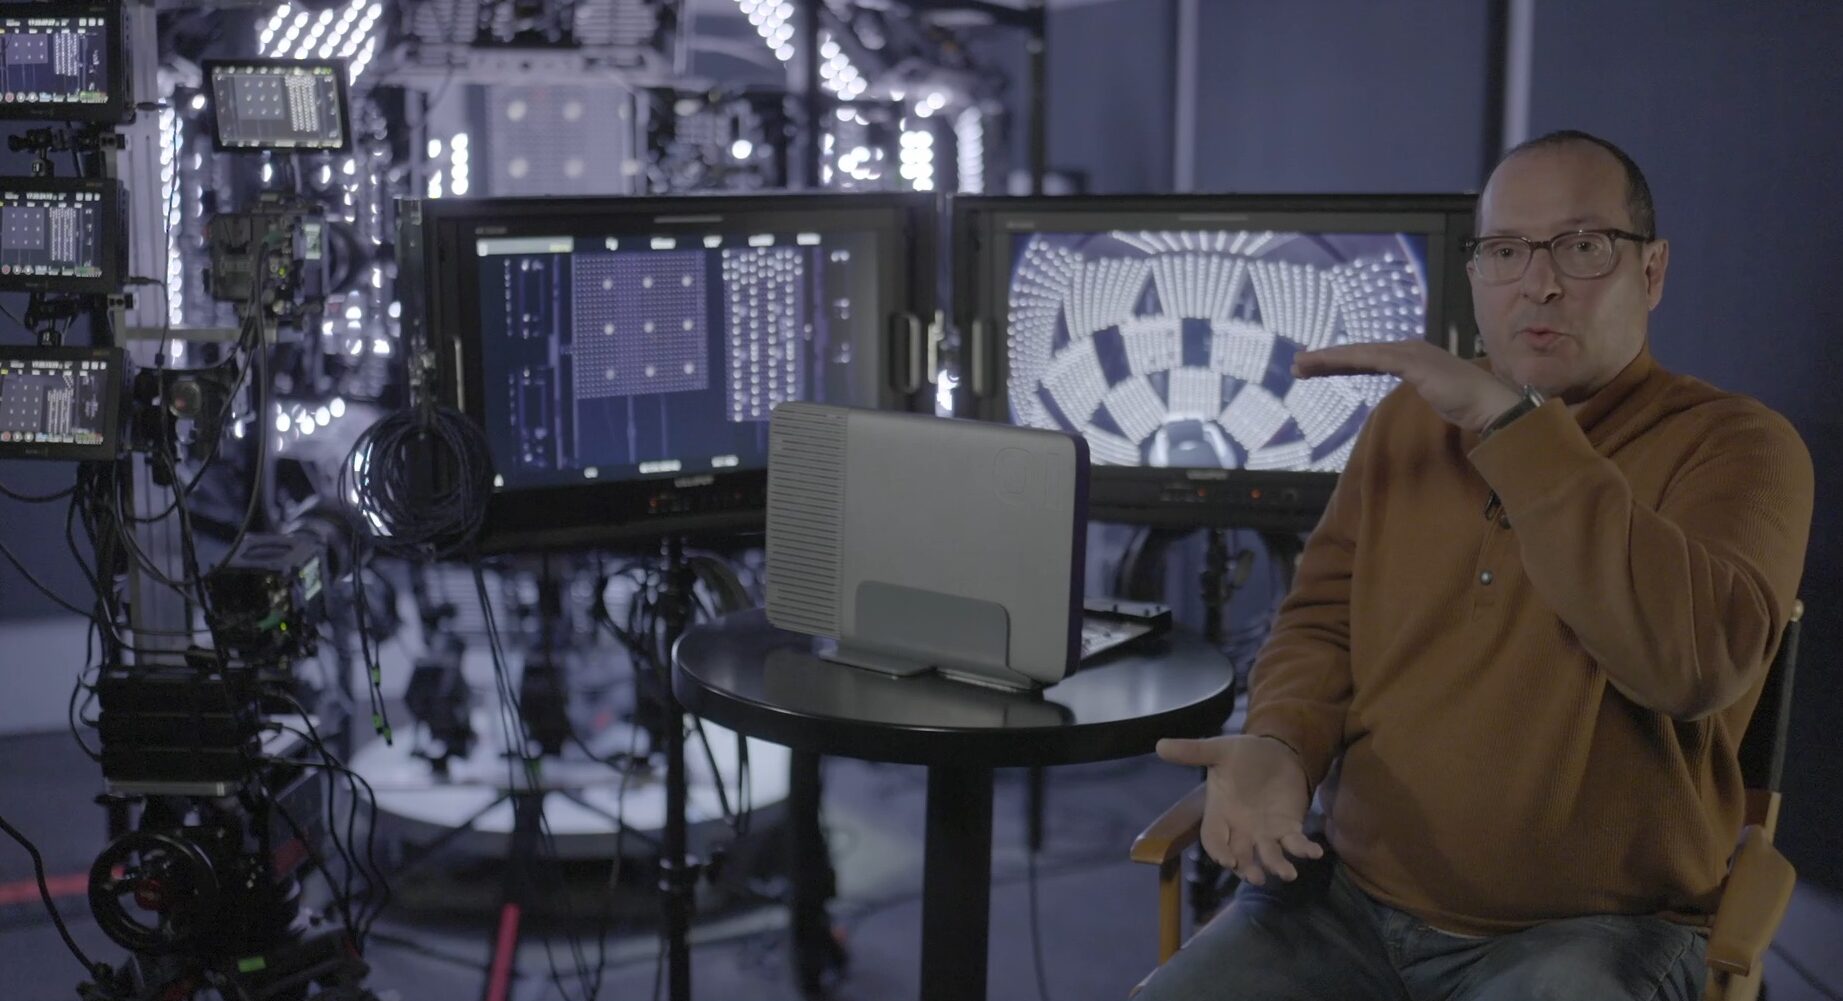 Man sitting in front of monitors and lighting equipment in a visual effects production space and speaking at the camera.